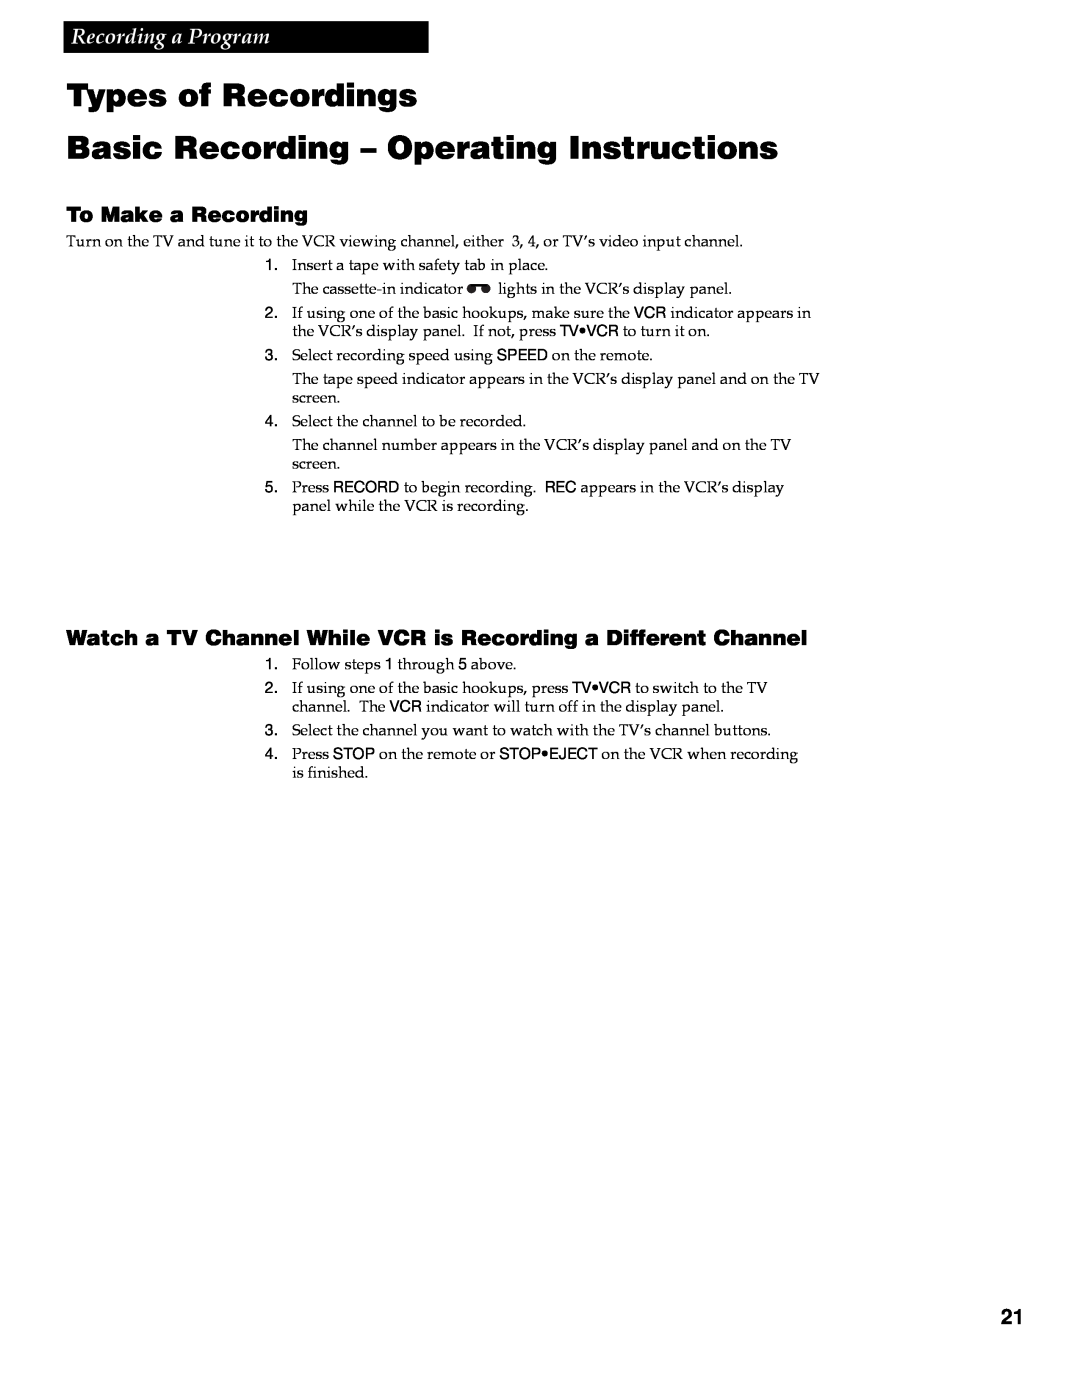 RCA VR609HF manual Types of Recordings Basic Recording - Operating Instructions, To Make a Recording, Recording a Program 